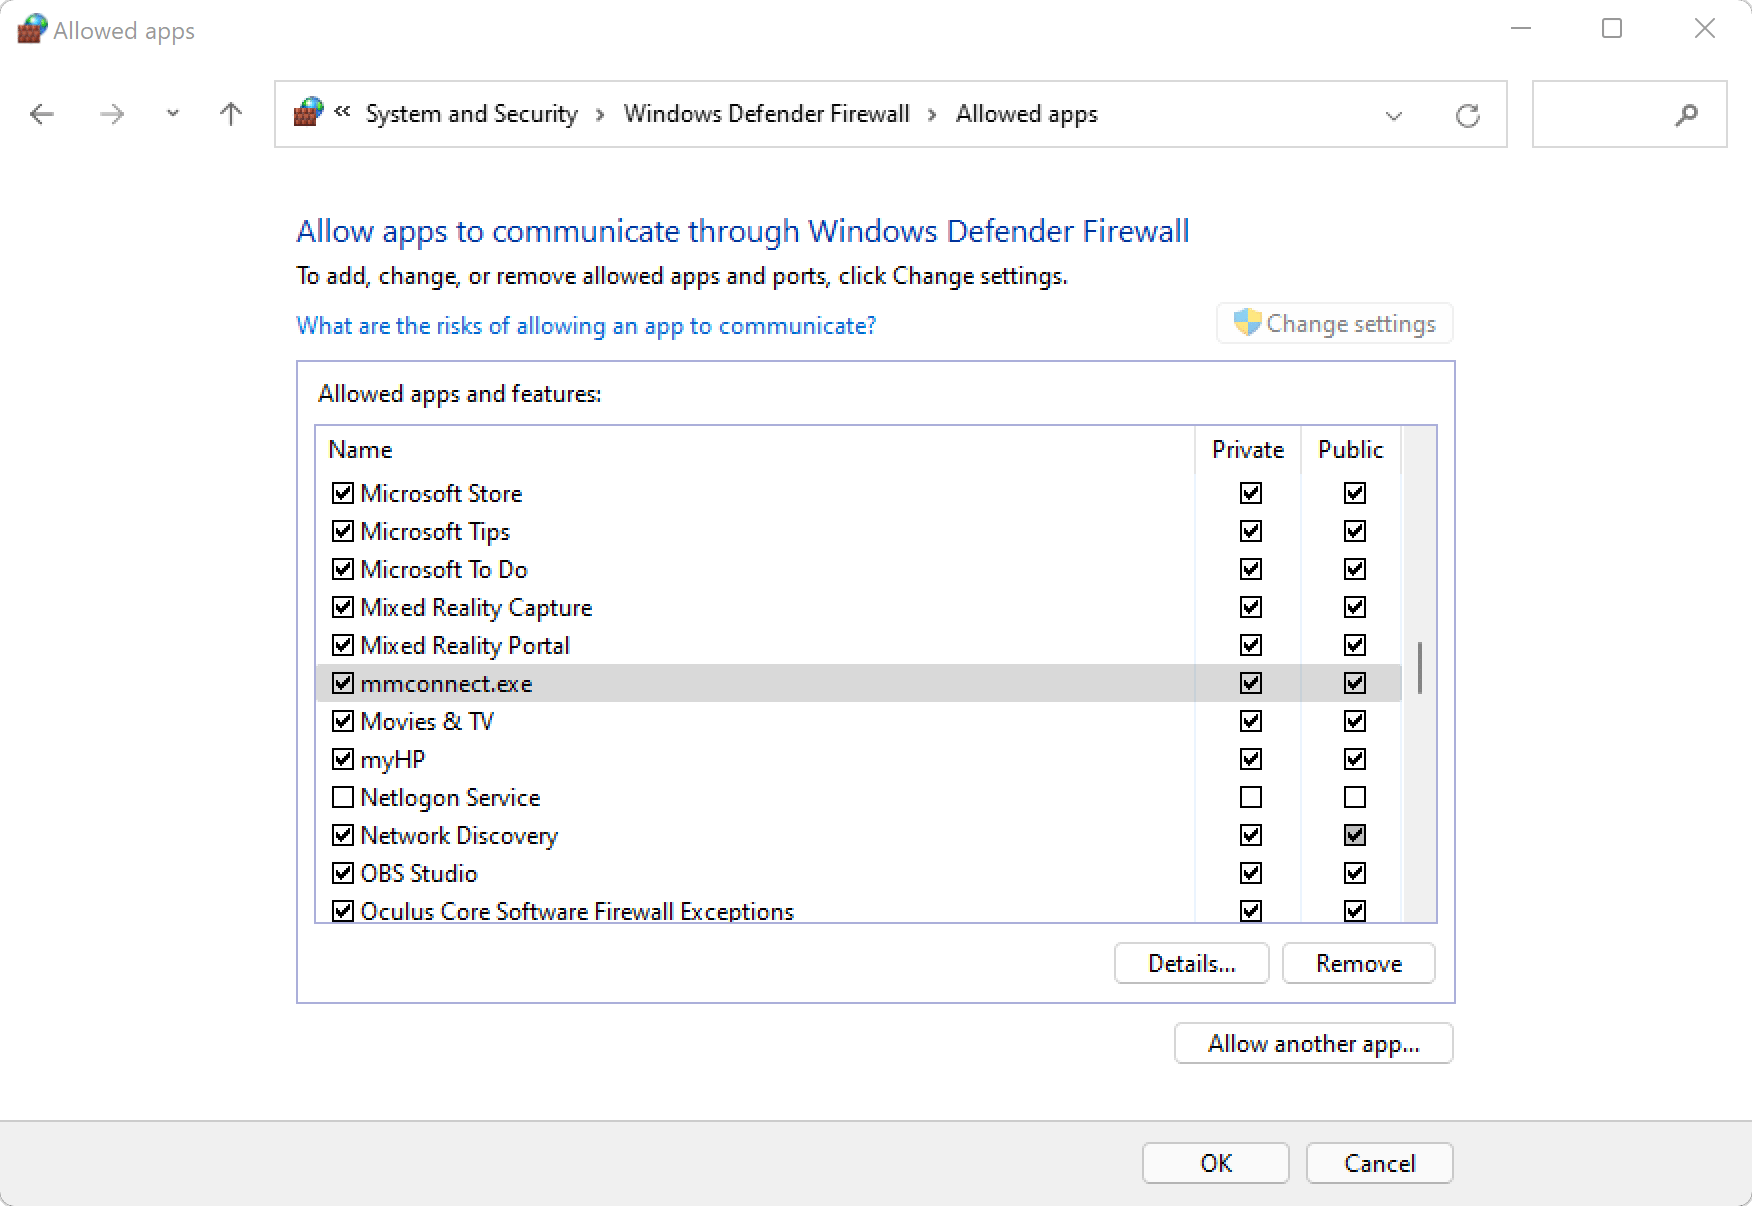 Screenshot of Windows Defender Firewall with mmconnect.exe highlighted in the menu and checkboxes checked for both public and private connections.